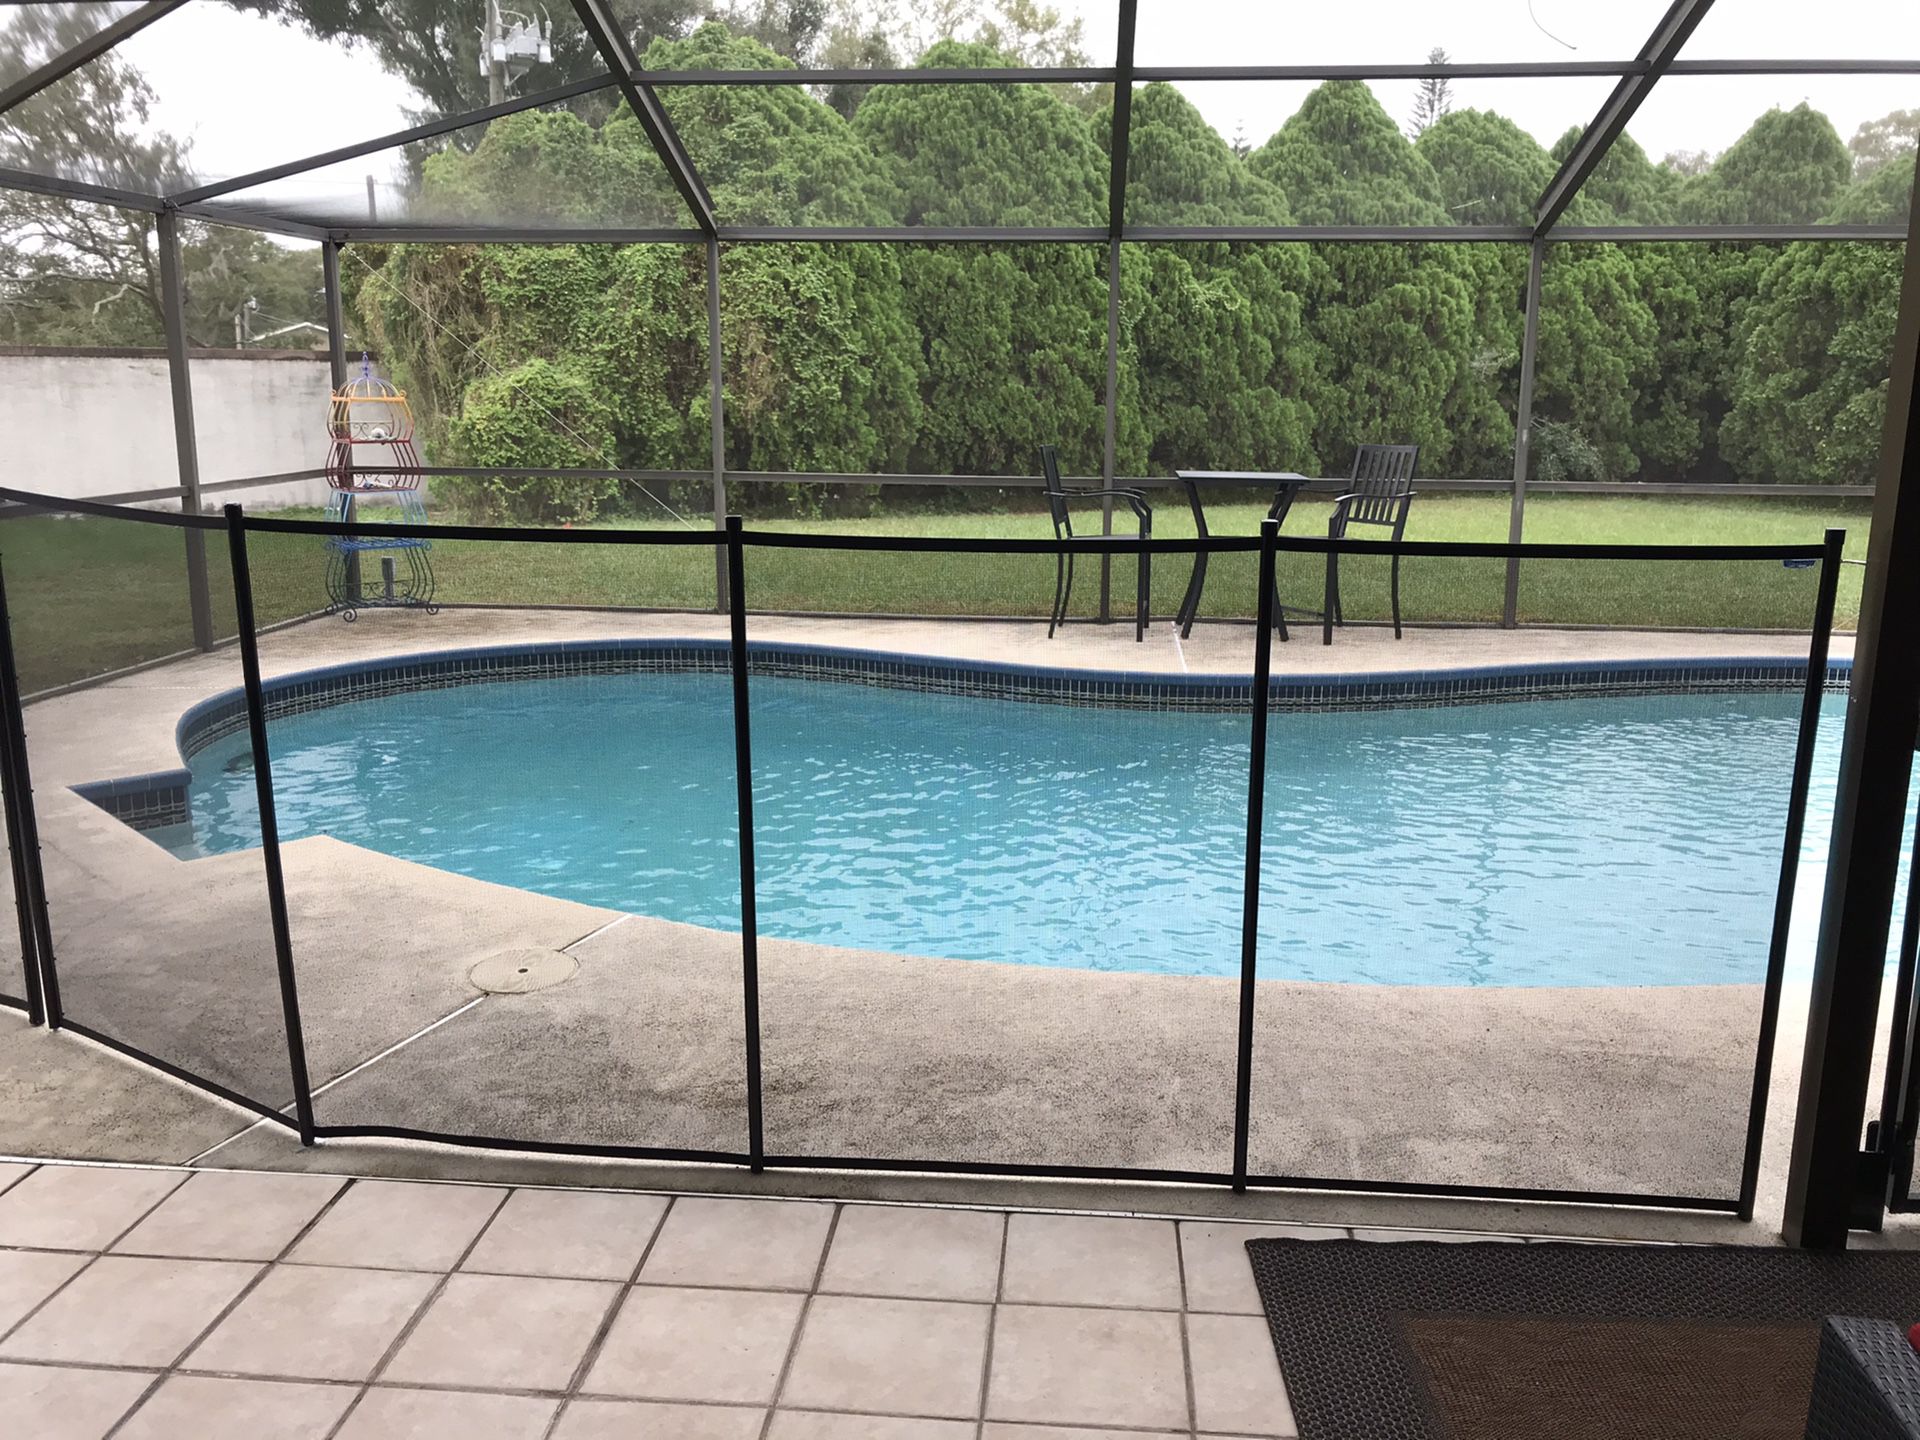 Pool safety fence 12’ section BRAND NEW